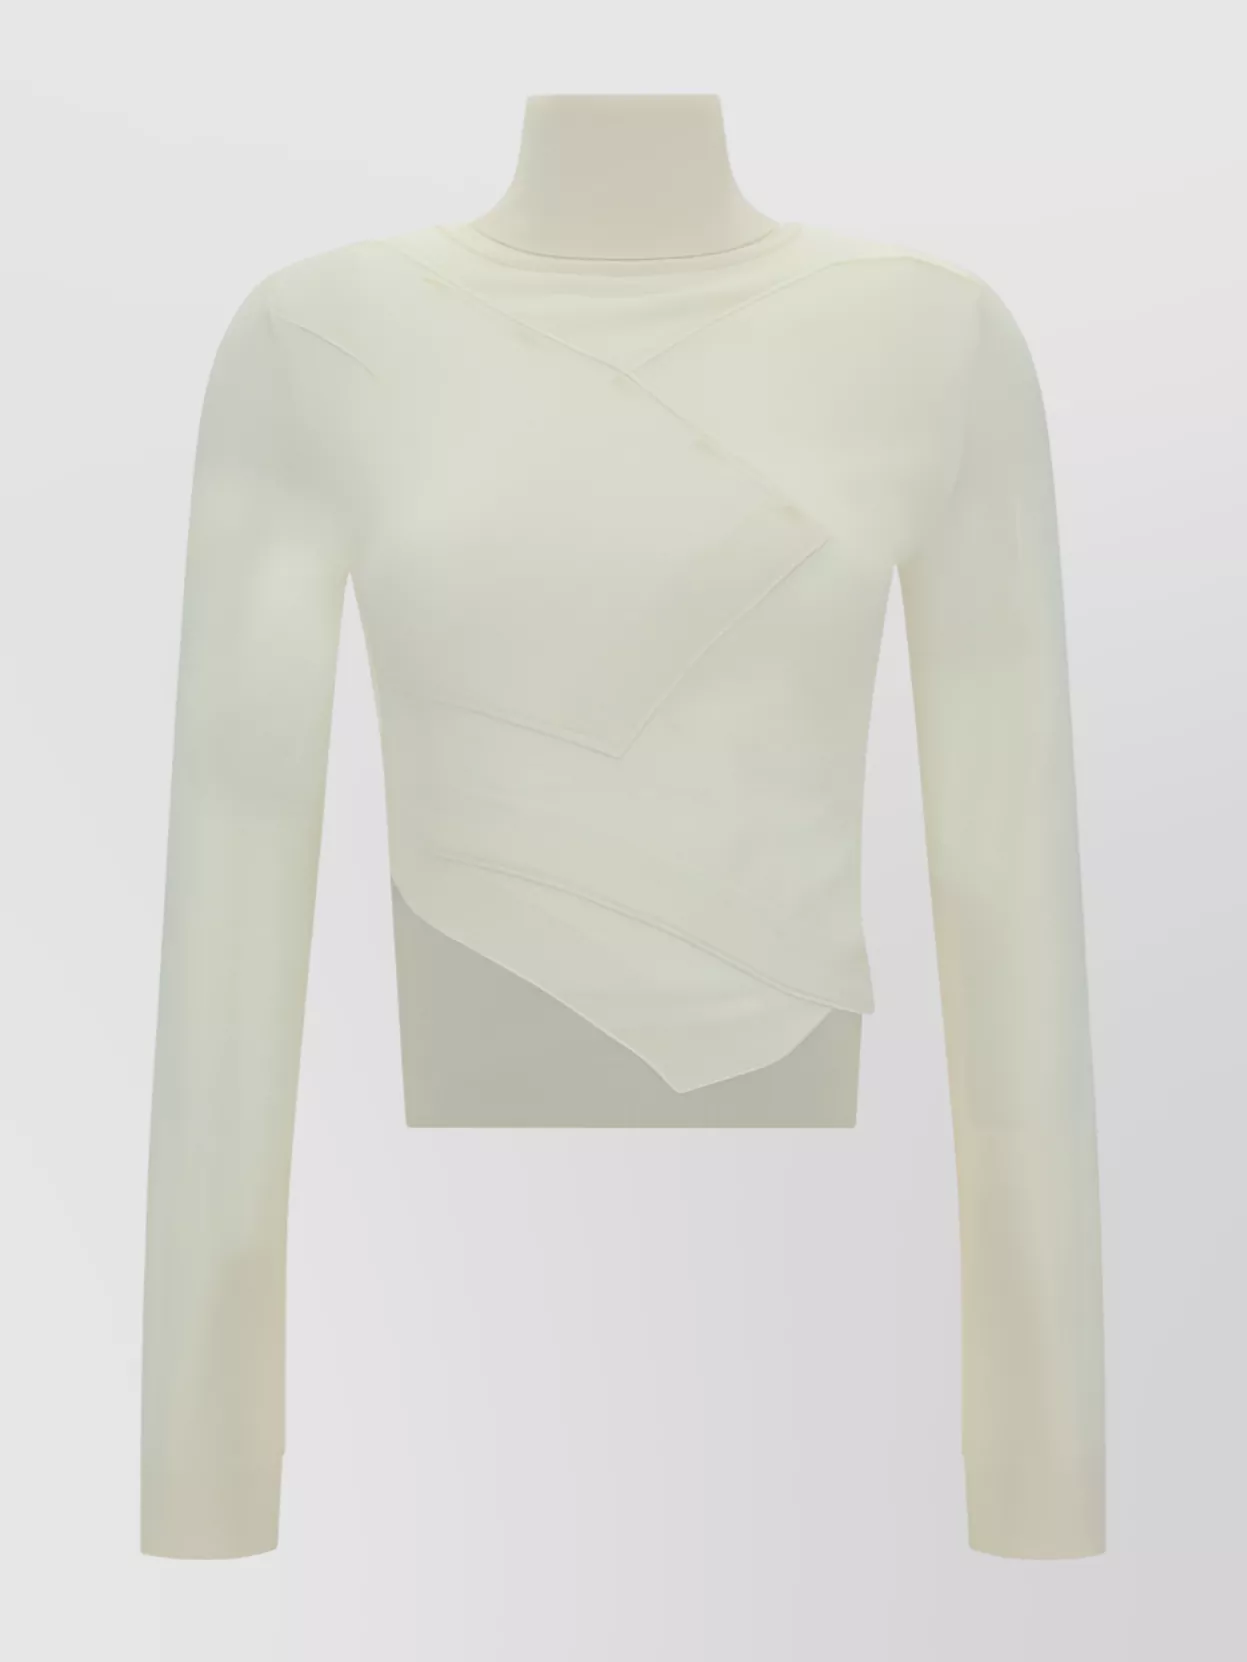 Mm6 Maison Margiela Sweater In Off White